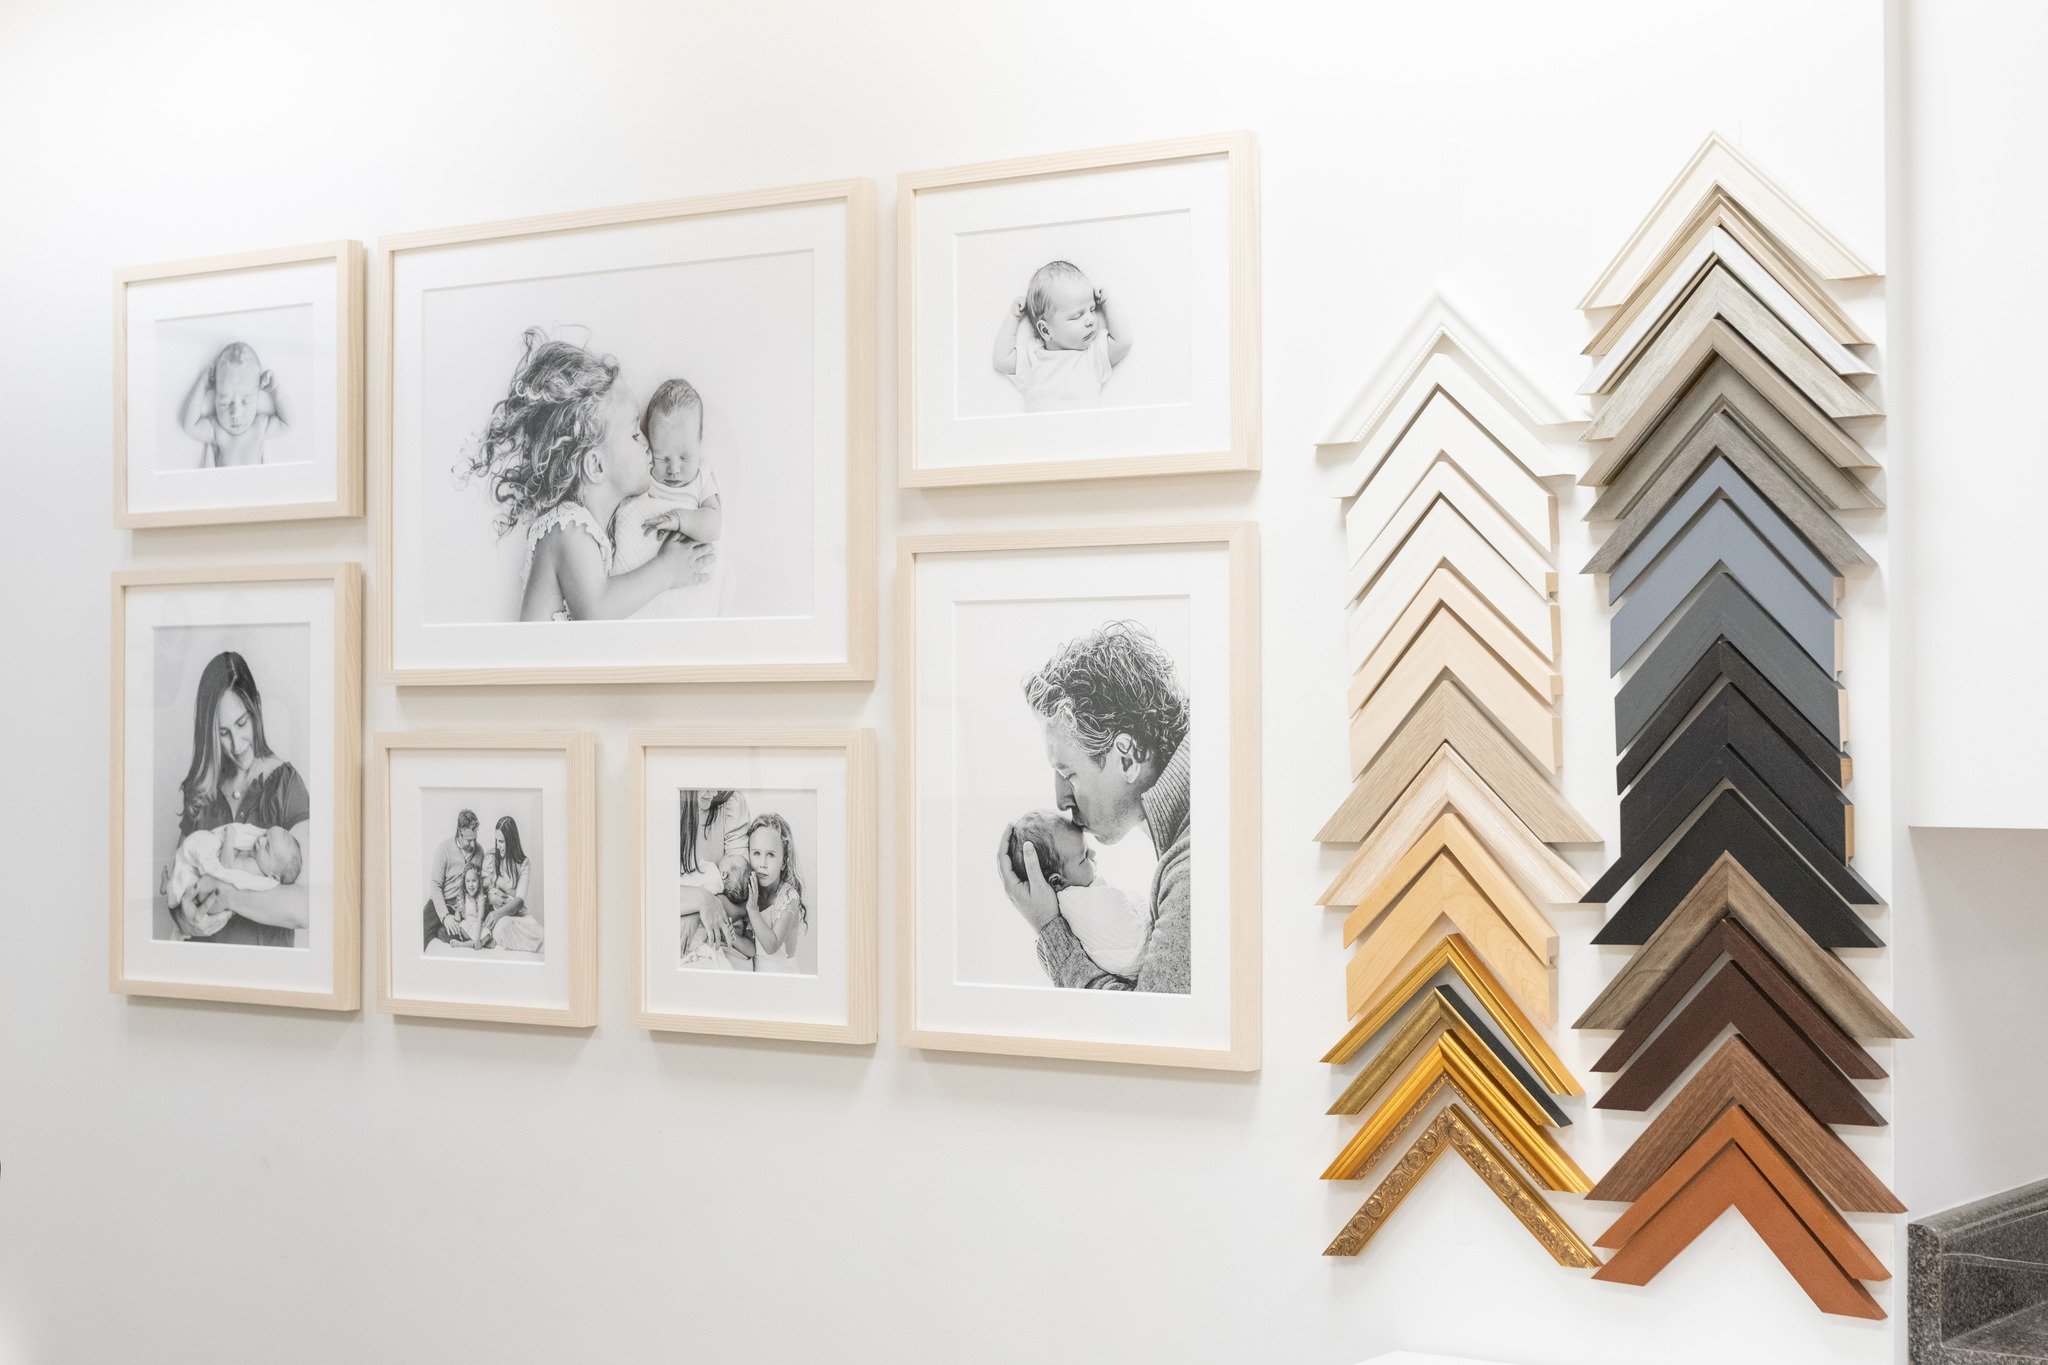 Your family portraits are beautiful on a screen, but the real magic happens when your favorite images are printed and installed in your home. Whether a single portrait, small grouping, or buildable wall gallery makes sense for your space, we love hel